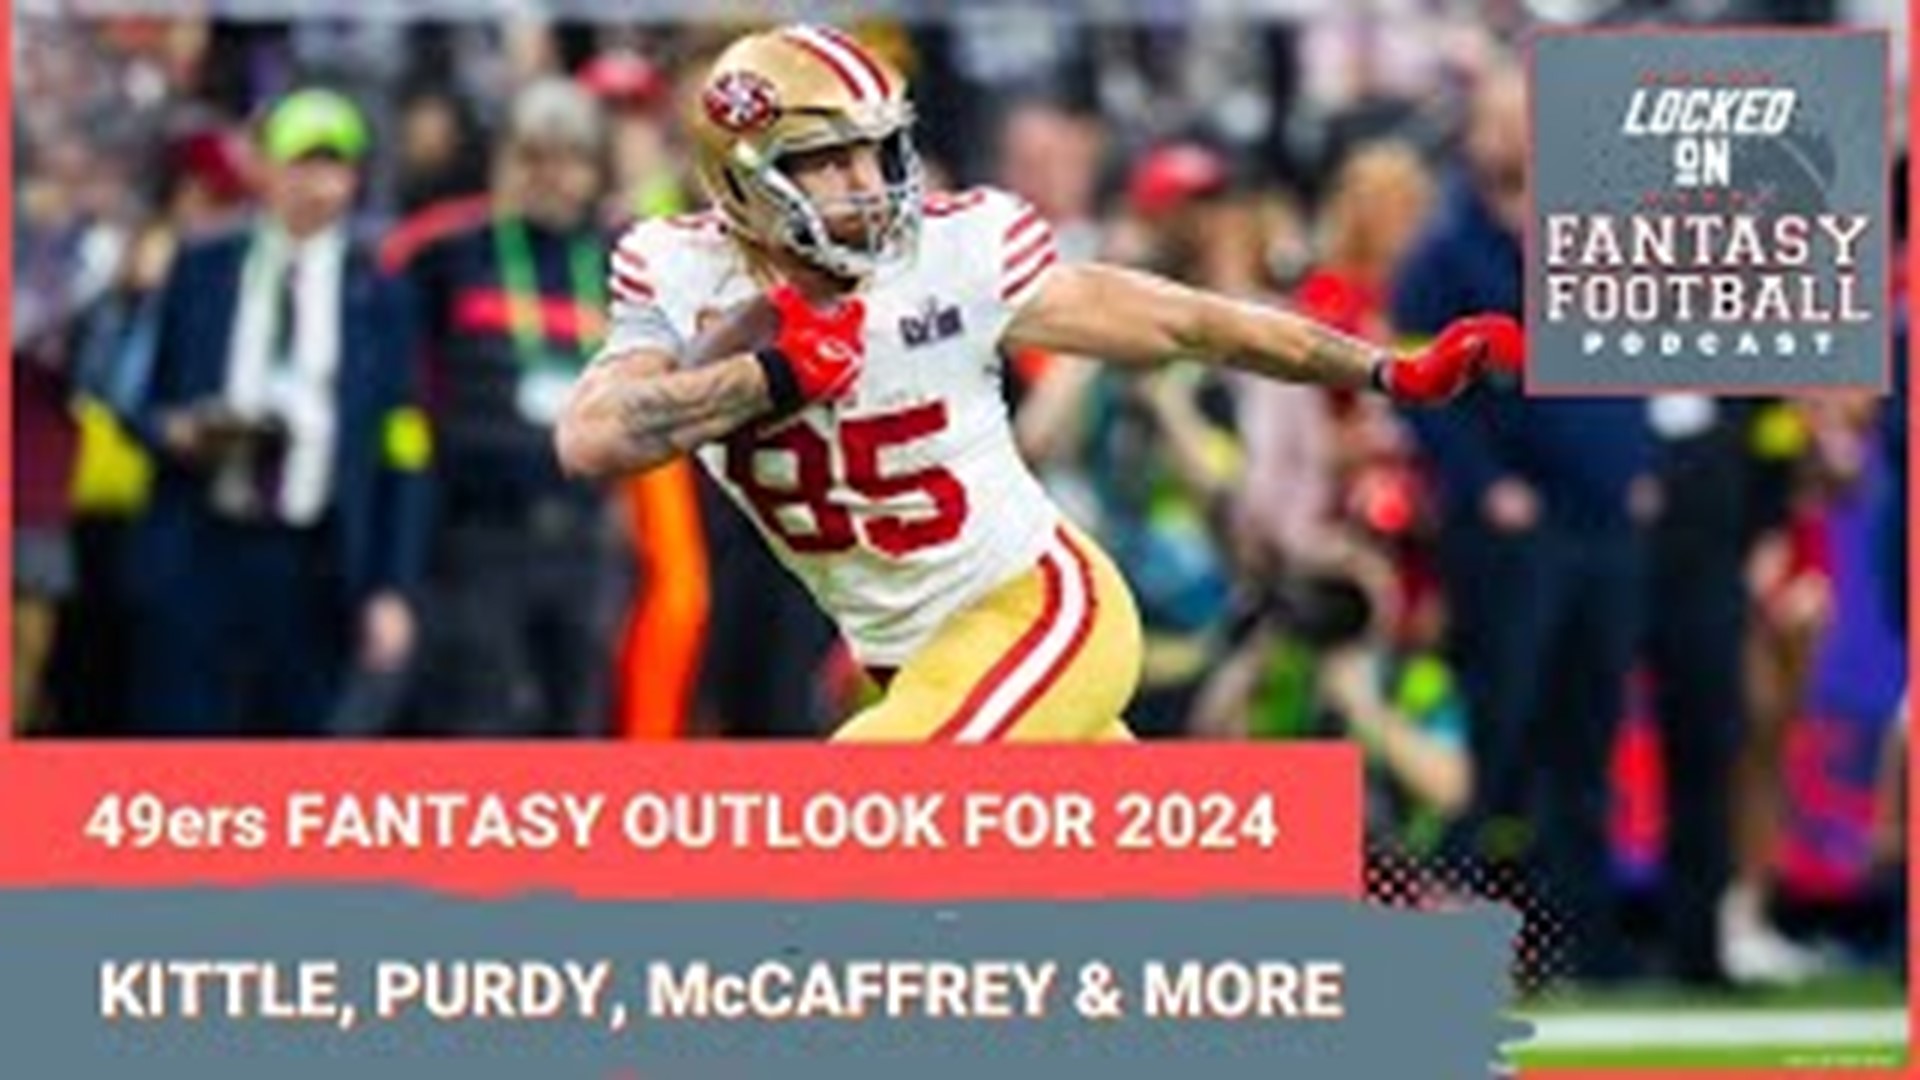 NFL.com's Michelle Magdziuk is joined by special guest Rob "Stats" Guerrera to discuss the 2024 fantasy outlook for the 49ers stacked offense including Brock Purdy.